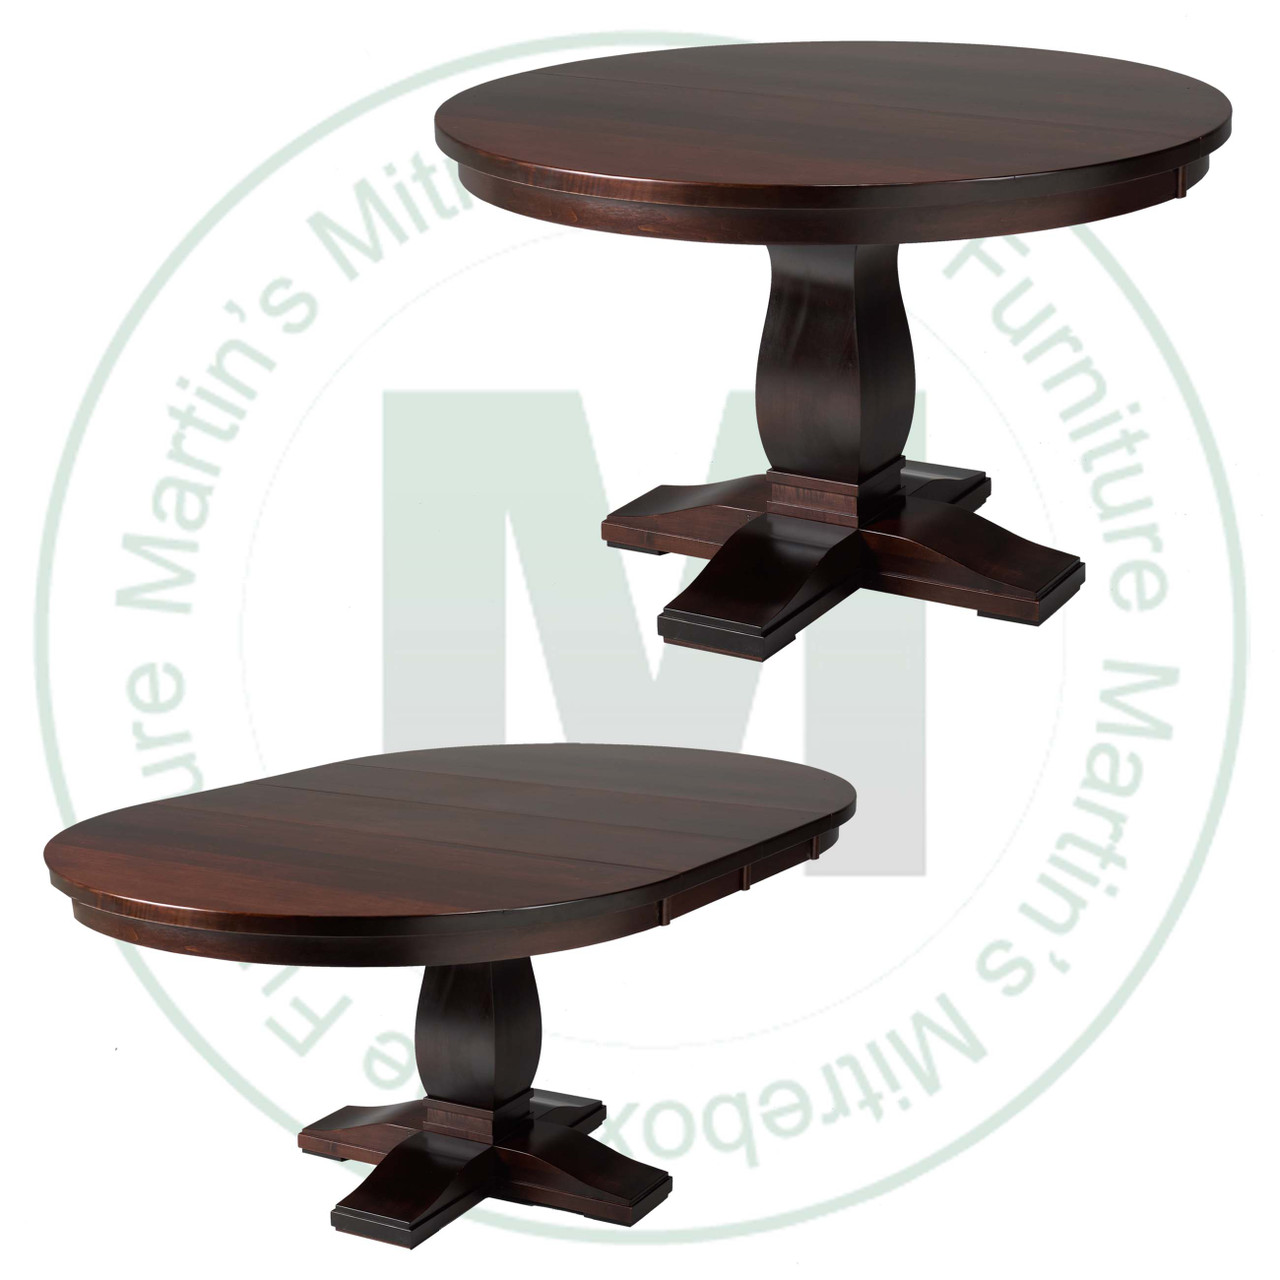 Maple Valencia Single Pedestal Table 36''D x 48''W x 30''H With 2 - 12'' Leaves Table